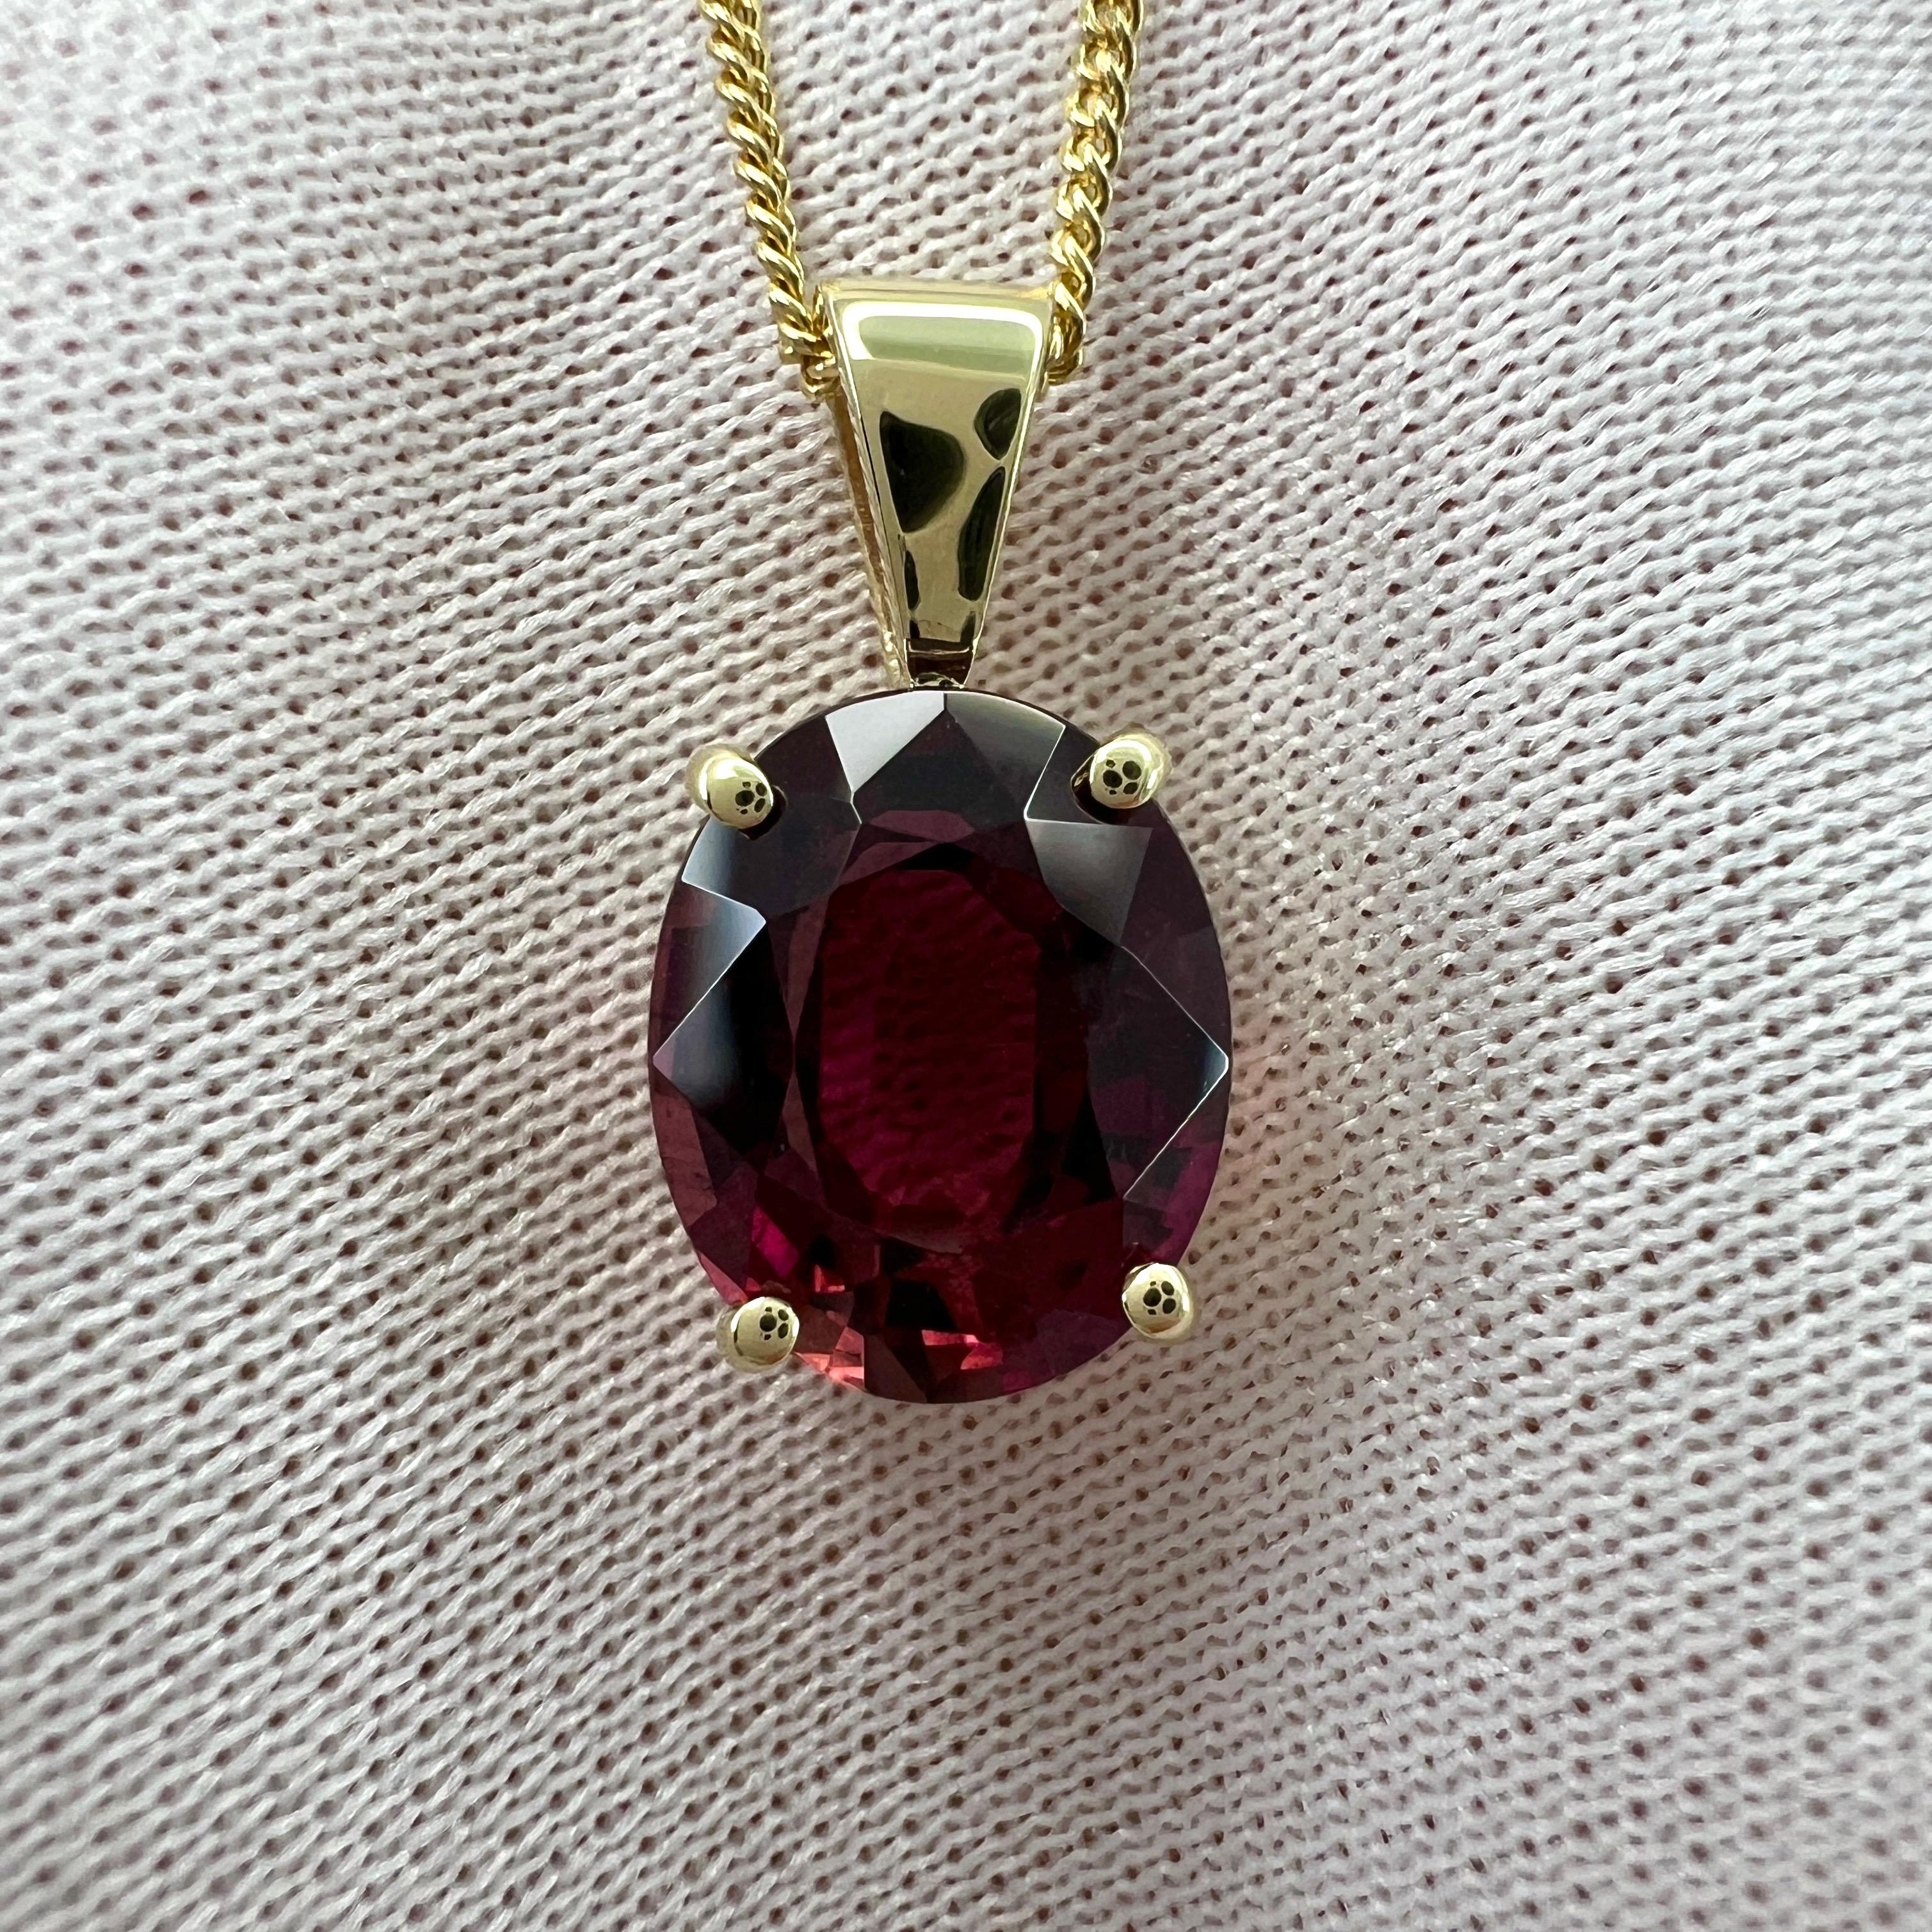 2.66ct Rubellite Tourmaline Pink Oval Cut 9k Yellow Gold Pendant Necklace For Sale 4